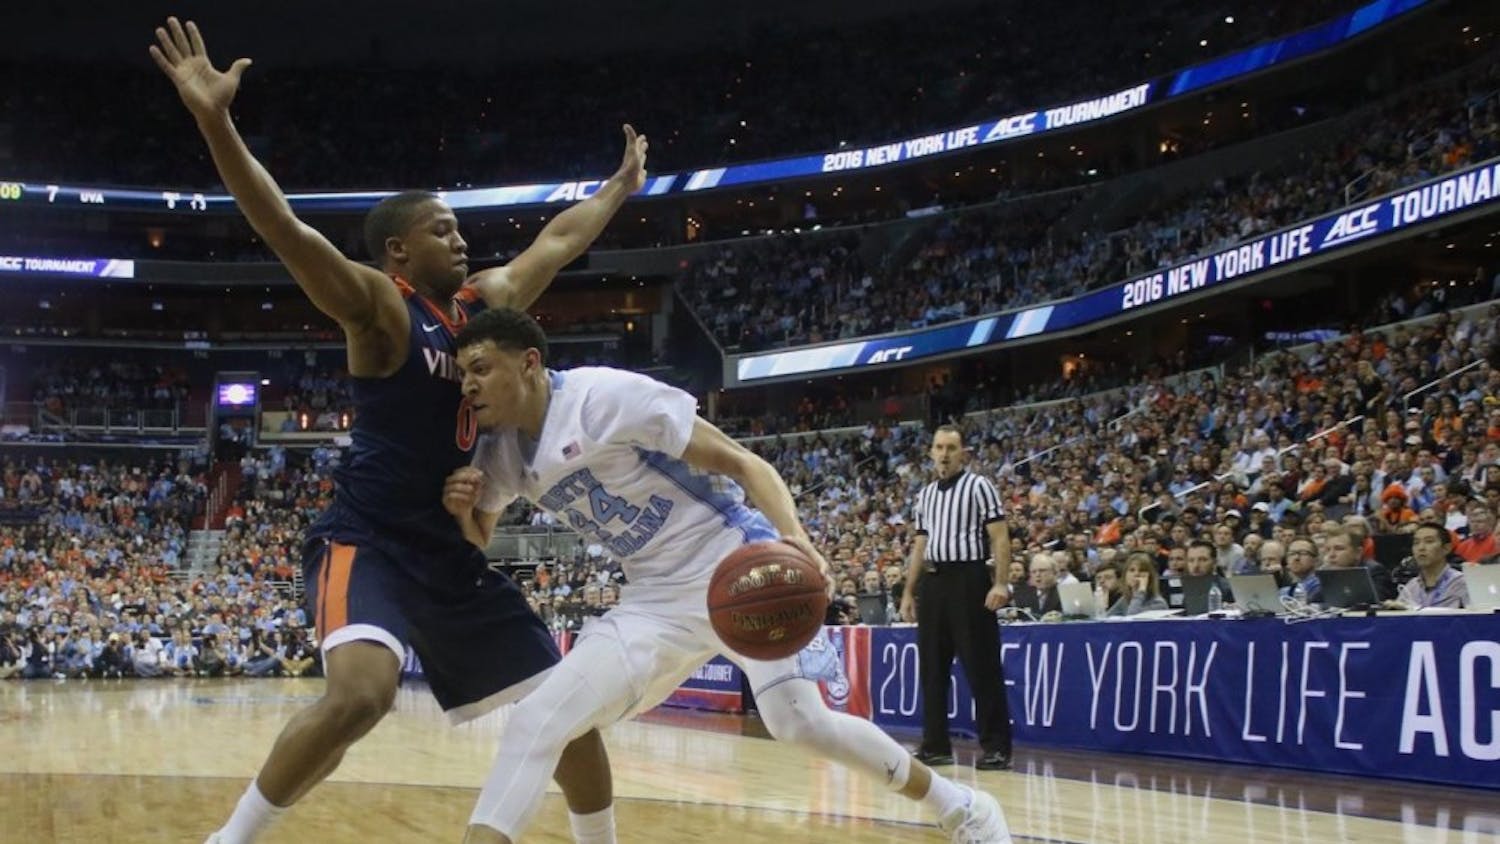 North Carolina wing Justin Jackson (44) drives on Virginia's Devon Hall (0) in the 2016 ACC Tournament final. UNC won that game, 61-57, and faces the Cavaliers on Saturday for the first time this season.